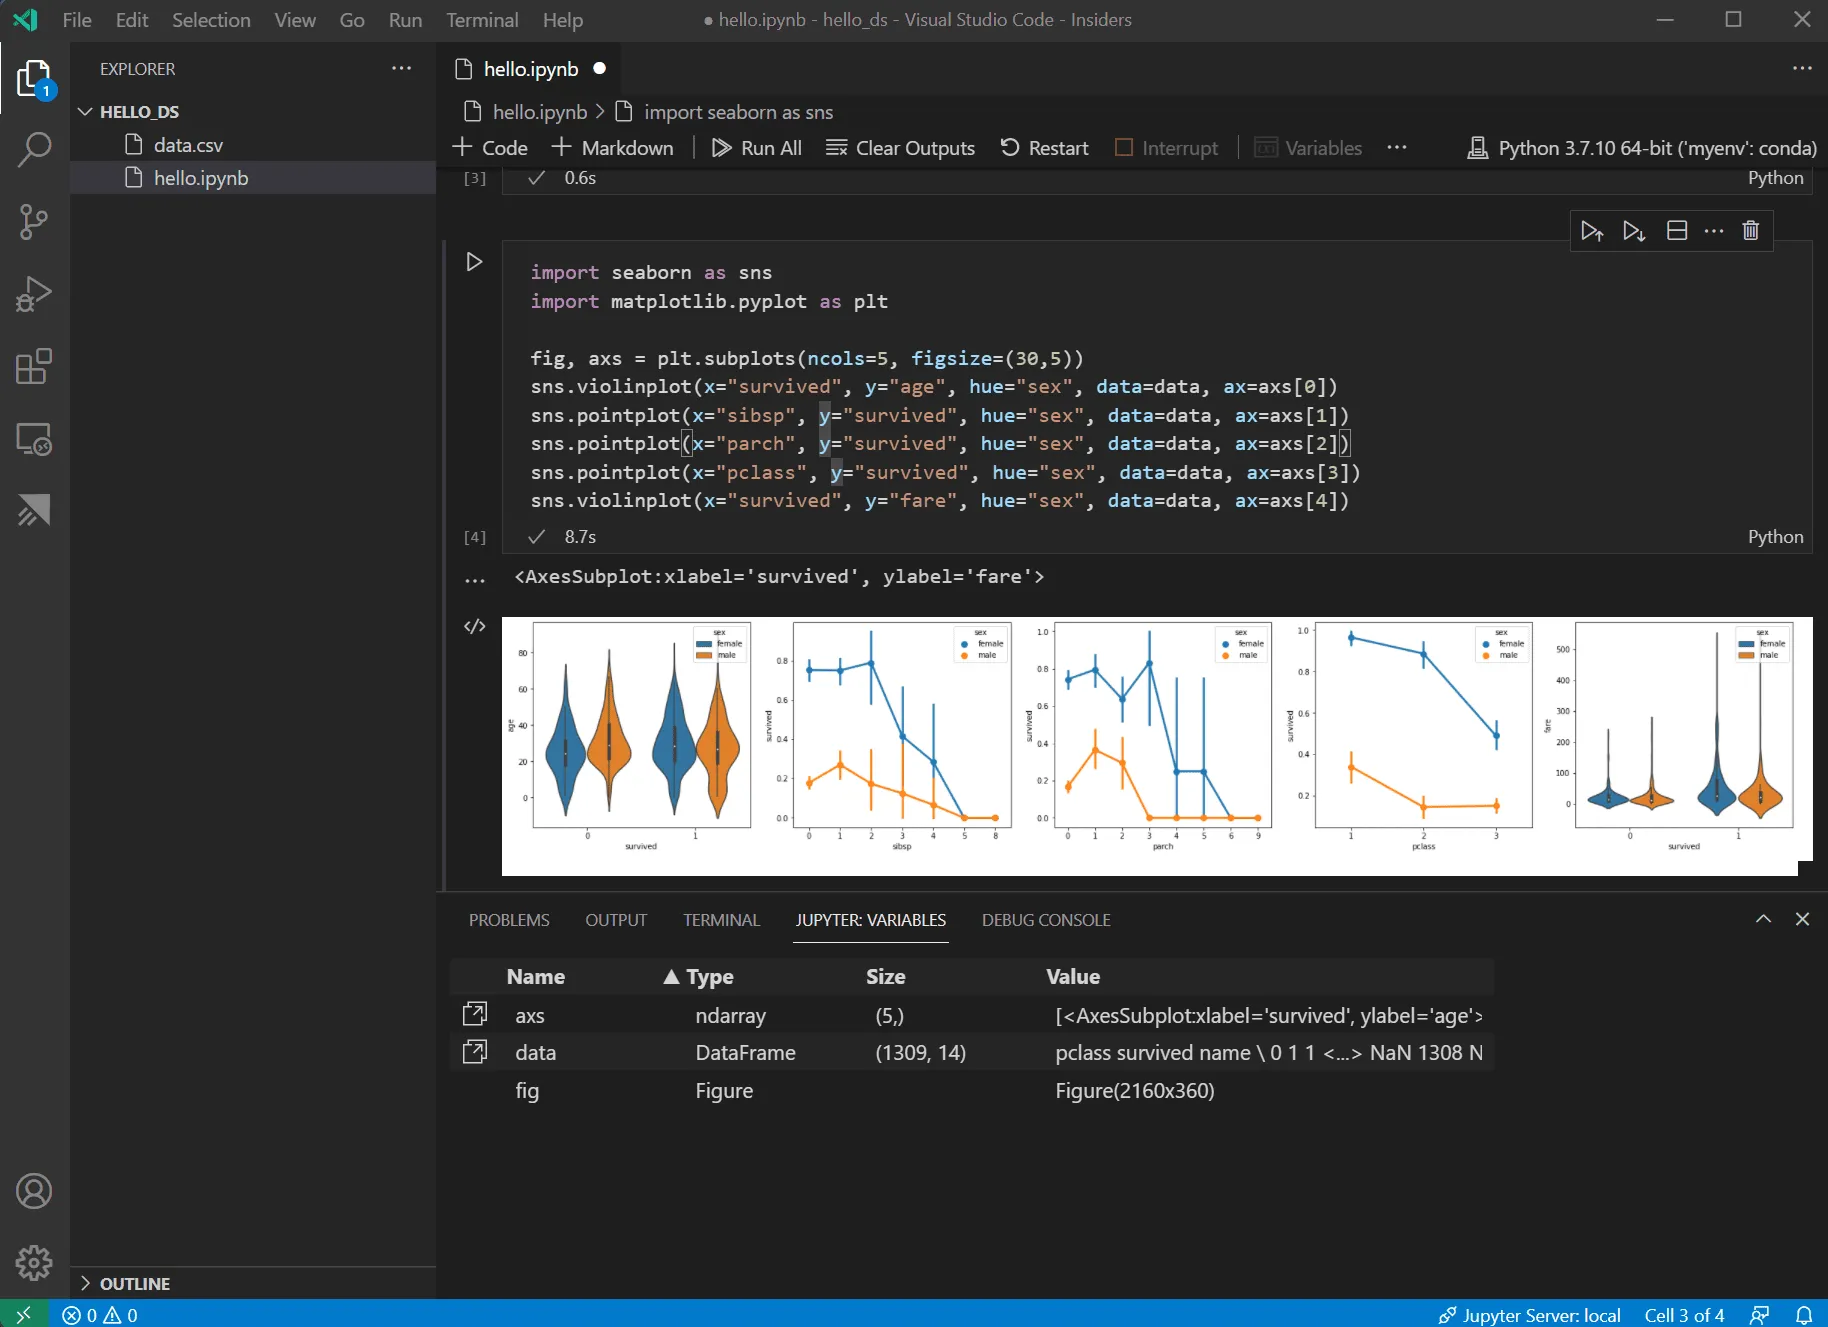 A Jupyter notebook in Visual Studio code displaying Python code and a data visualization